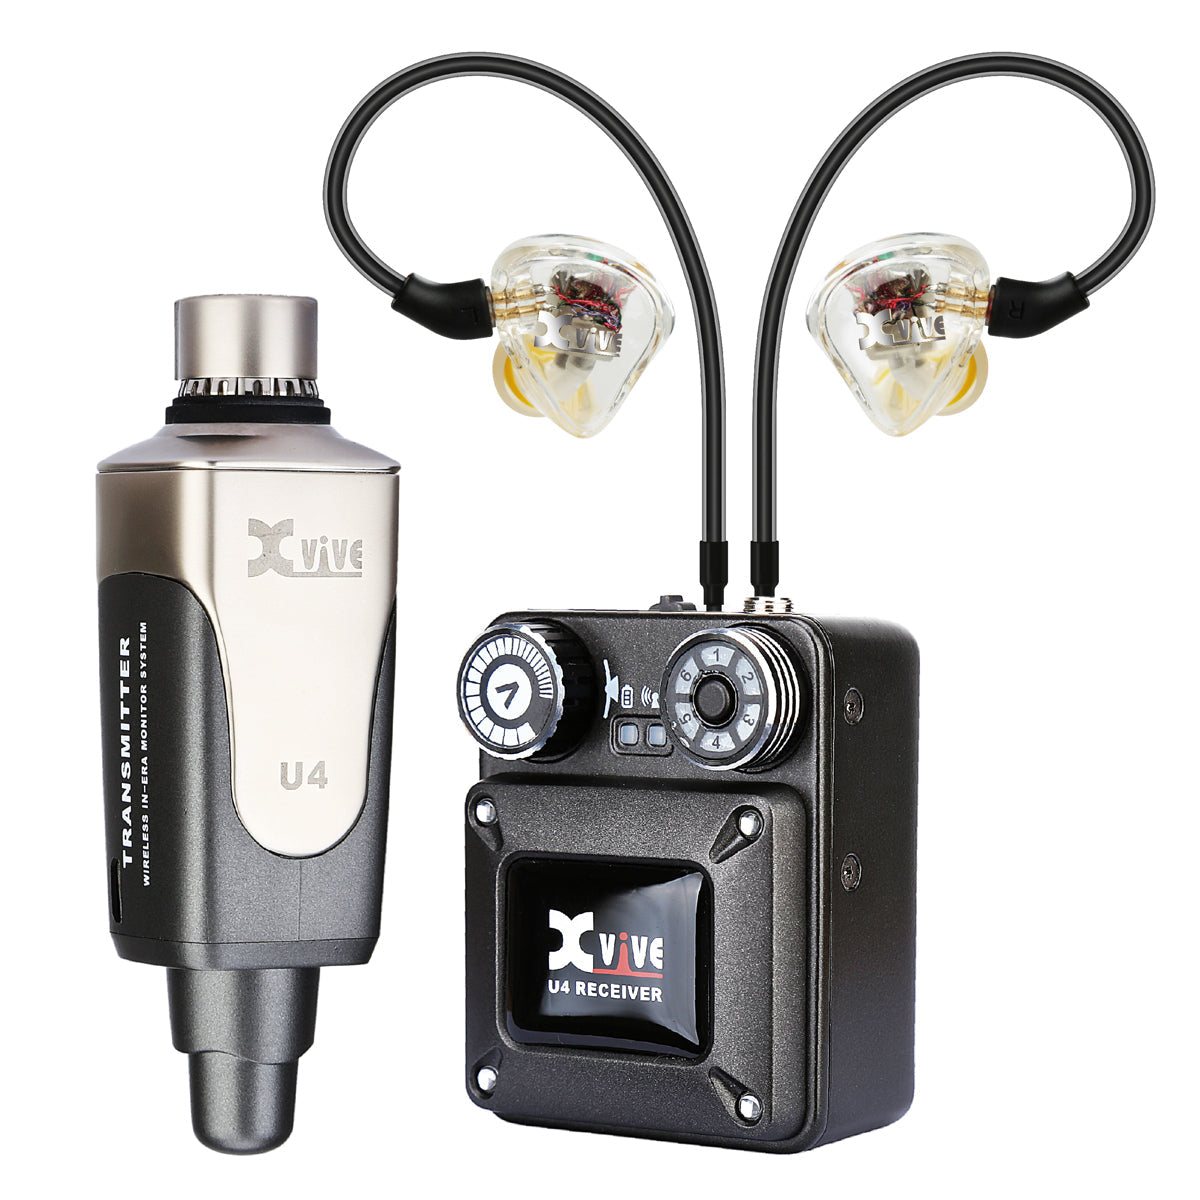 http://rguitars.co.uk/cdn/shop/files/wireless-iem-mic-systems-xvive-in-ear-monitor-wireless-system-with-t9-in-ear-monitors-and-travel-case-1.jpg?v=1694237886&width=2048